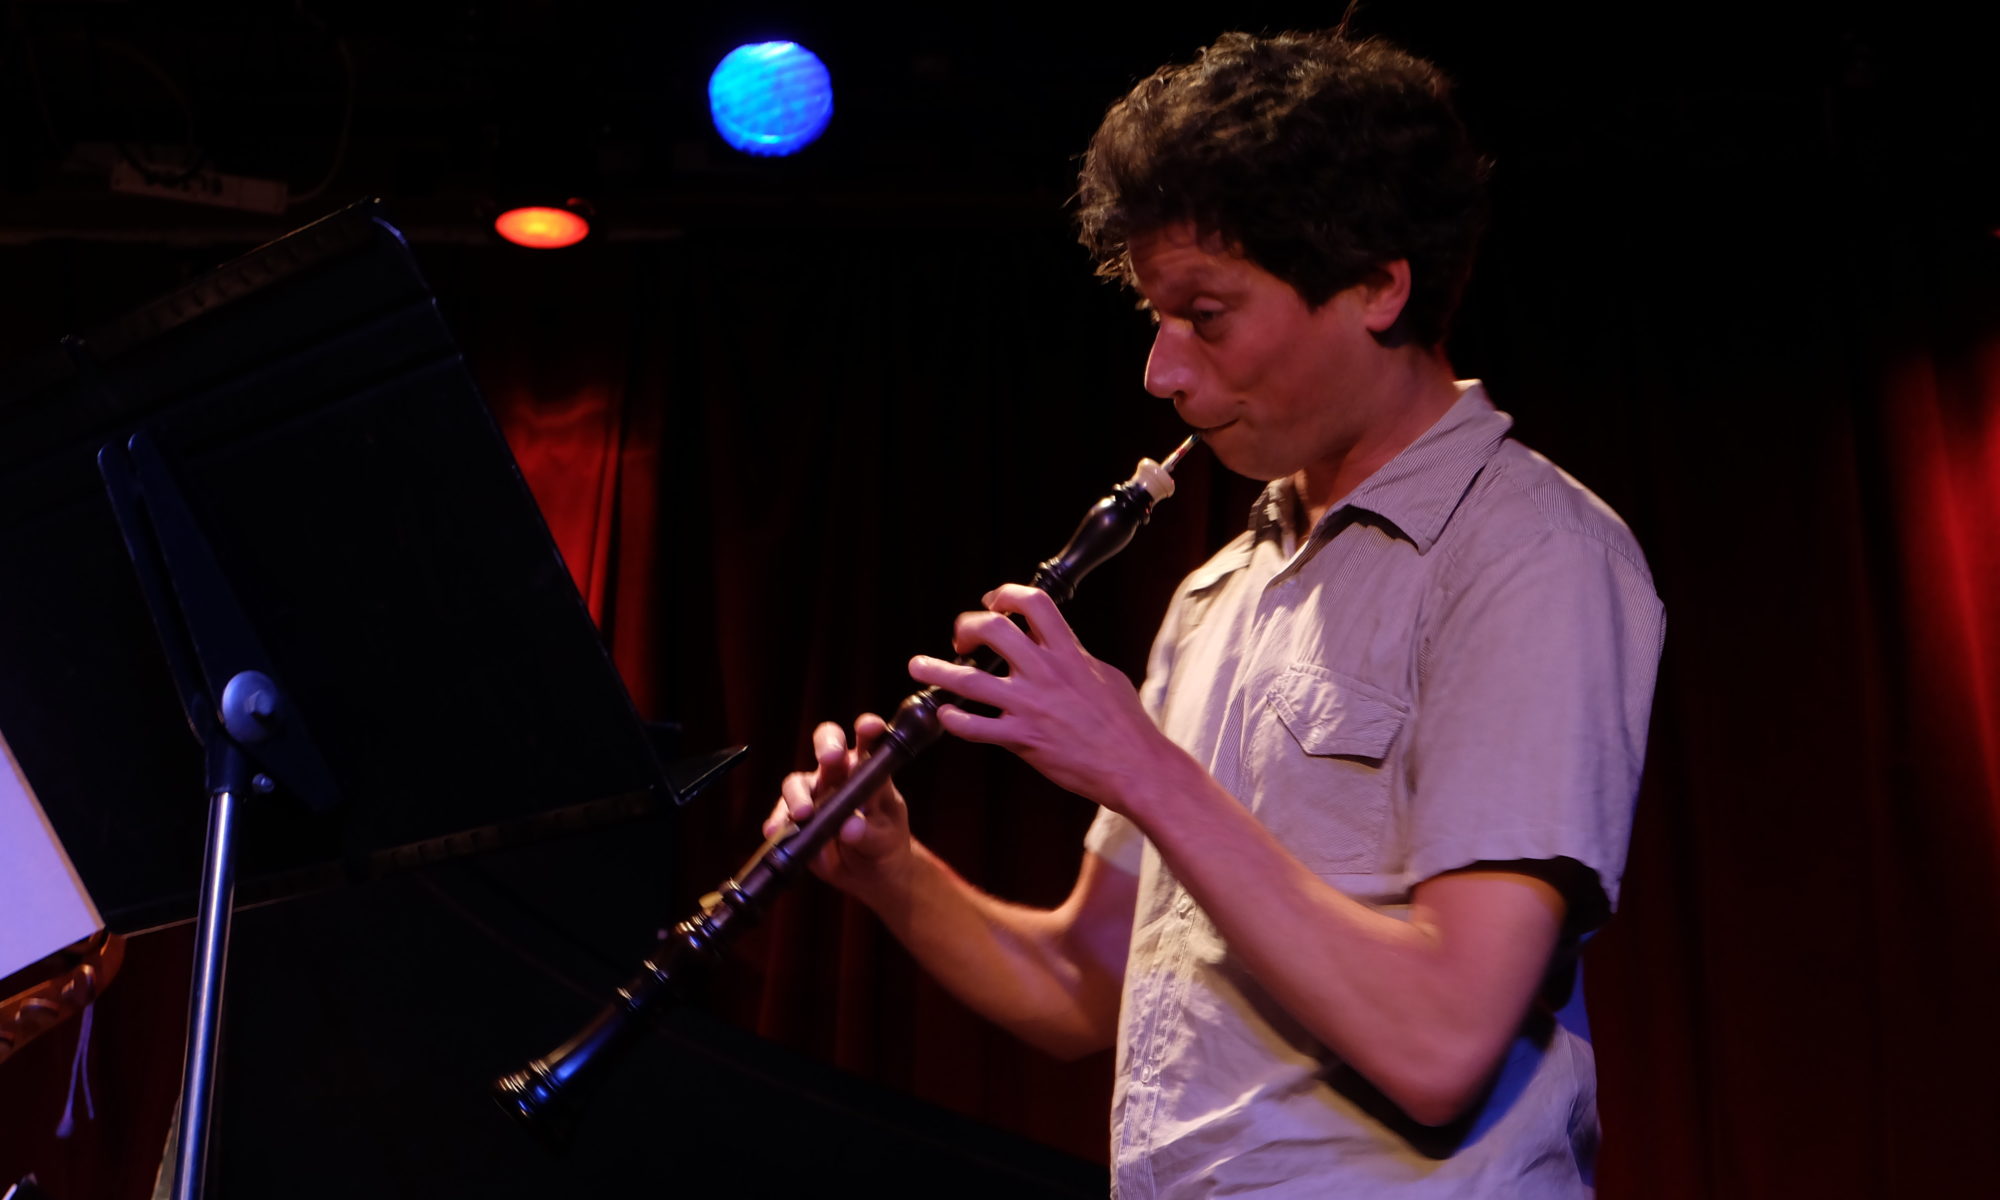 Floris and the Baroque Oboe